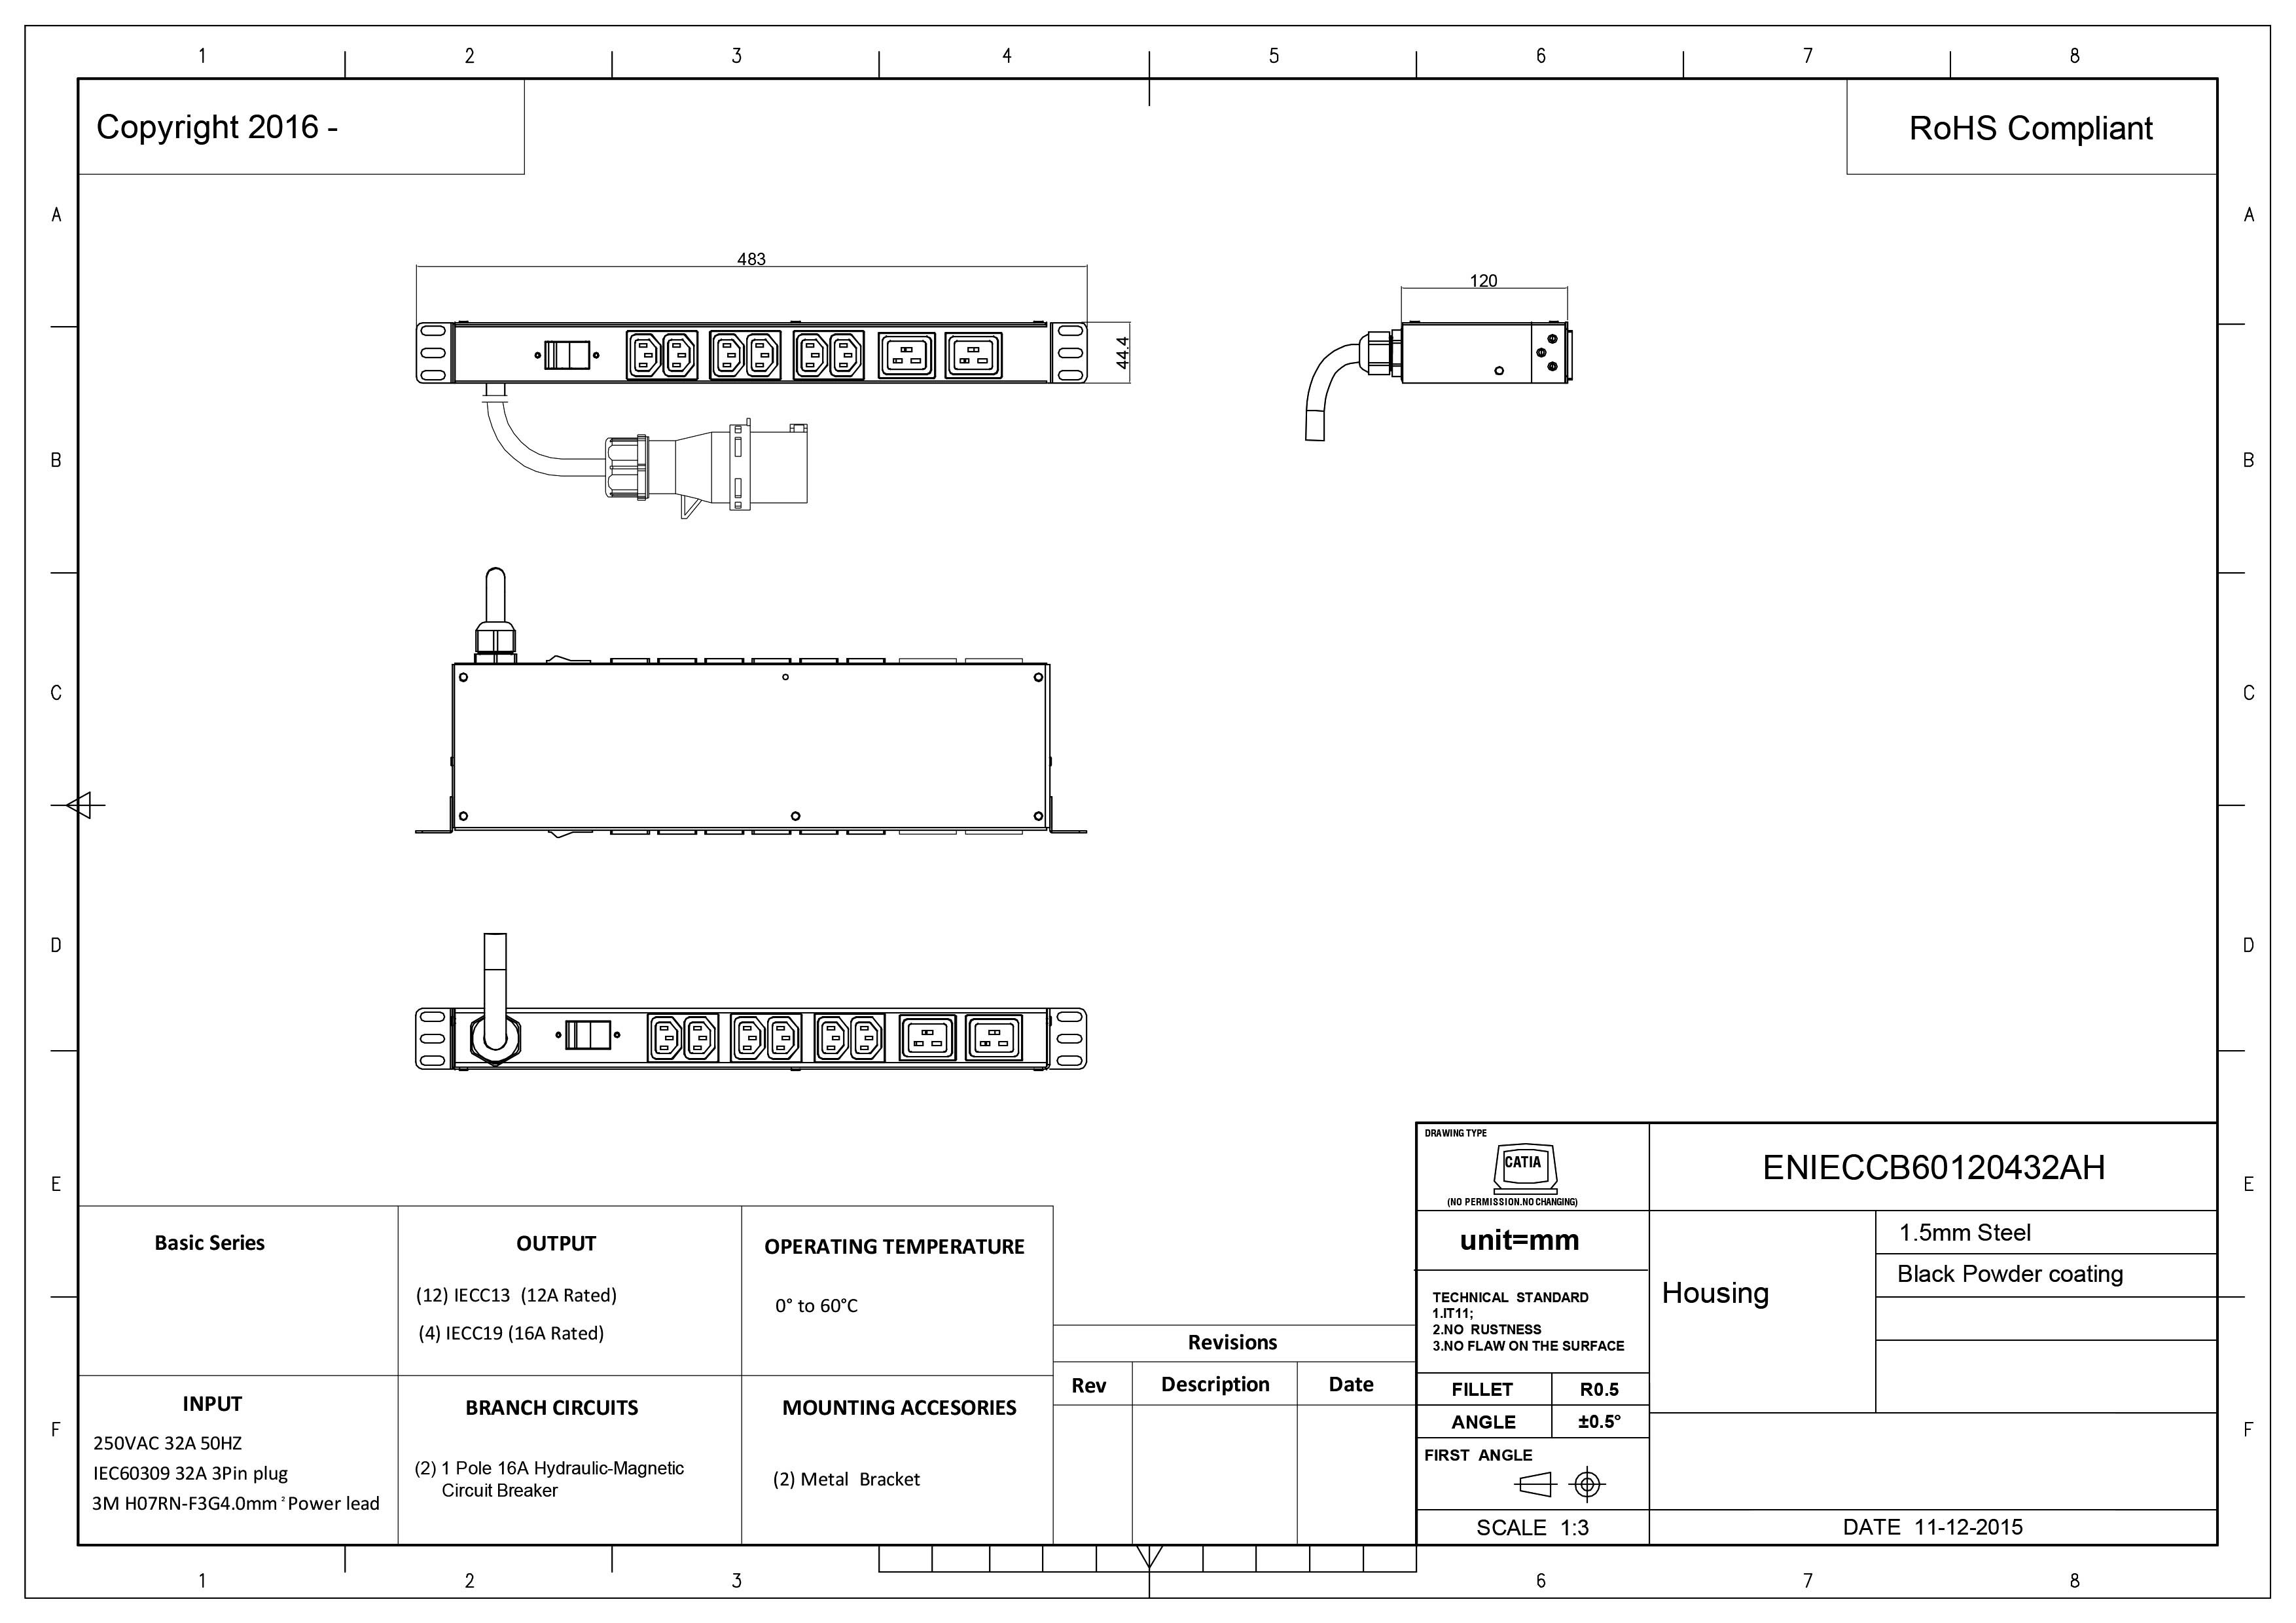 StructureSource HHD PDU Technical Drawing